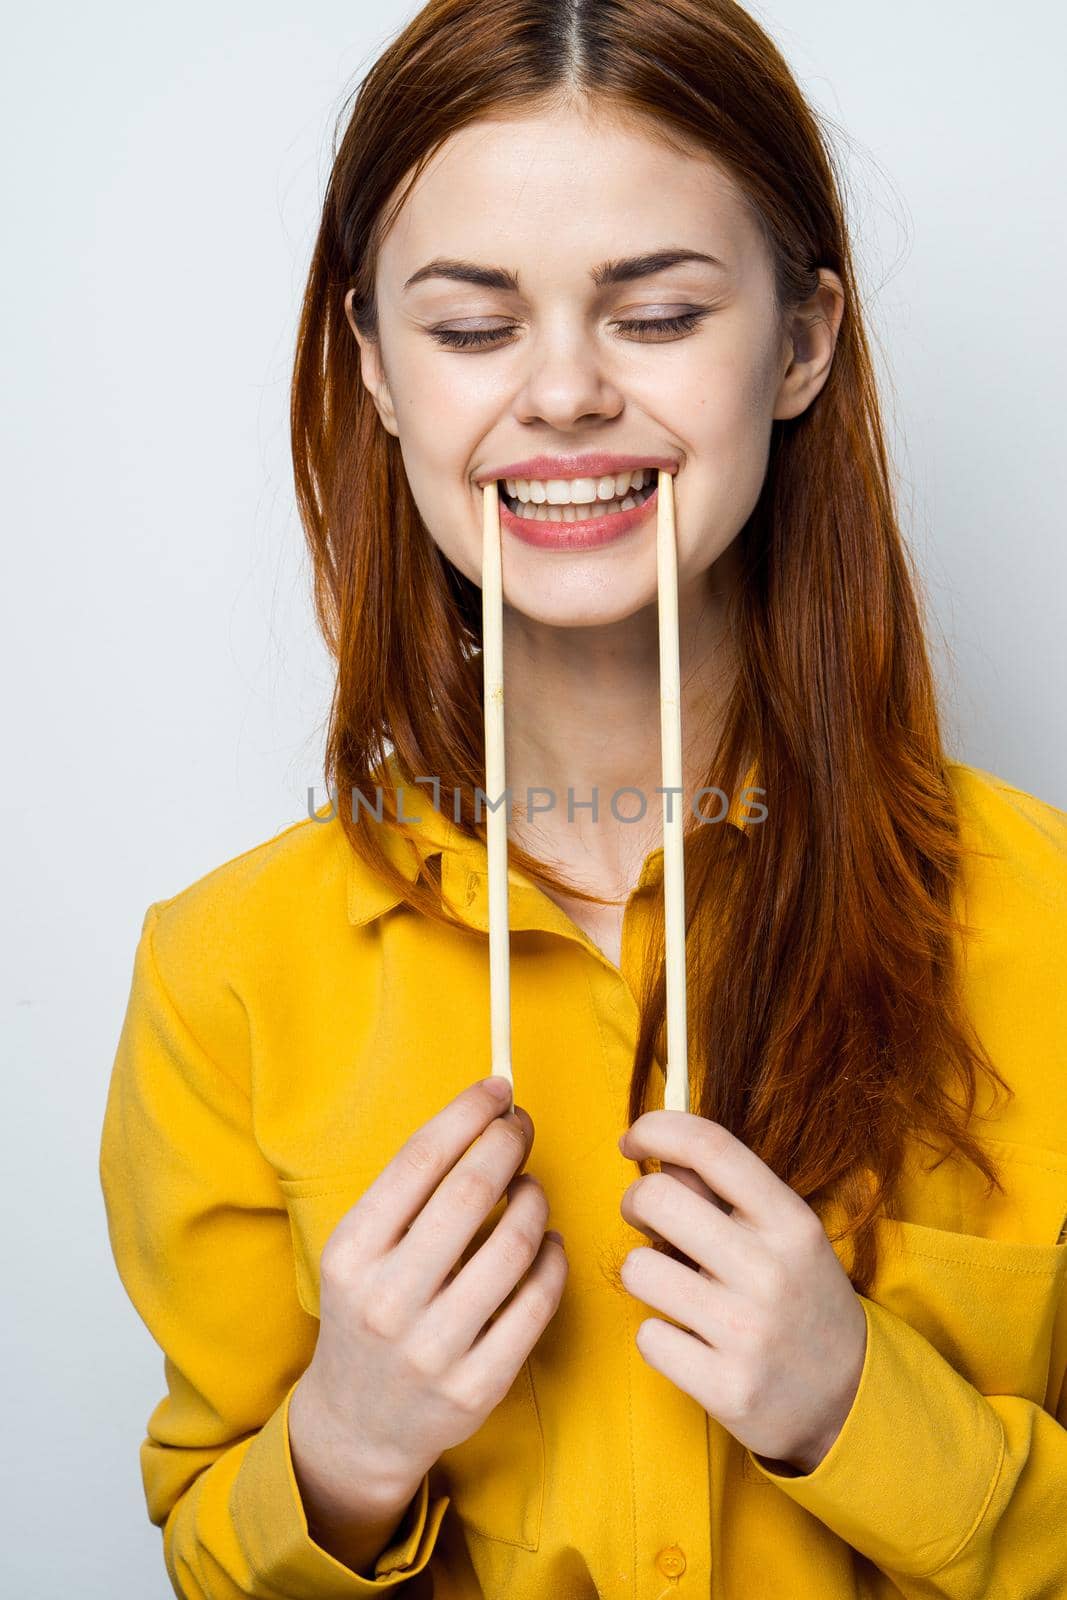 woman eating sushi with japanese chopsticks posing light background by Vichizh